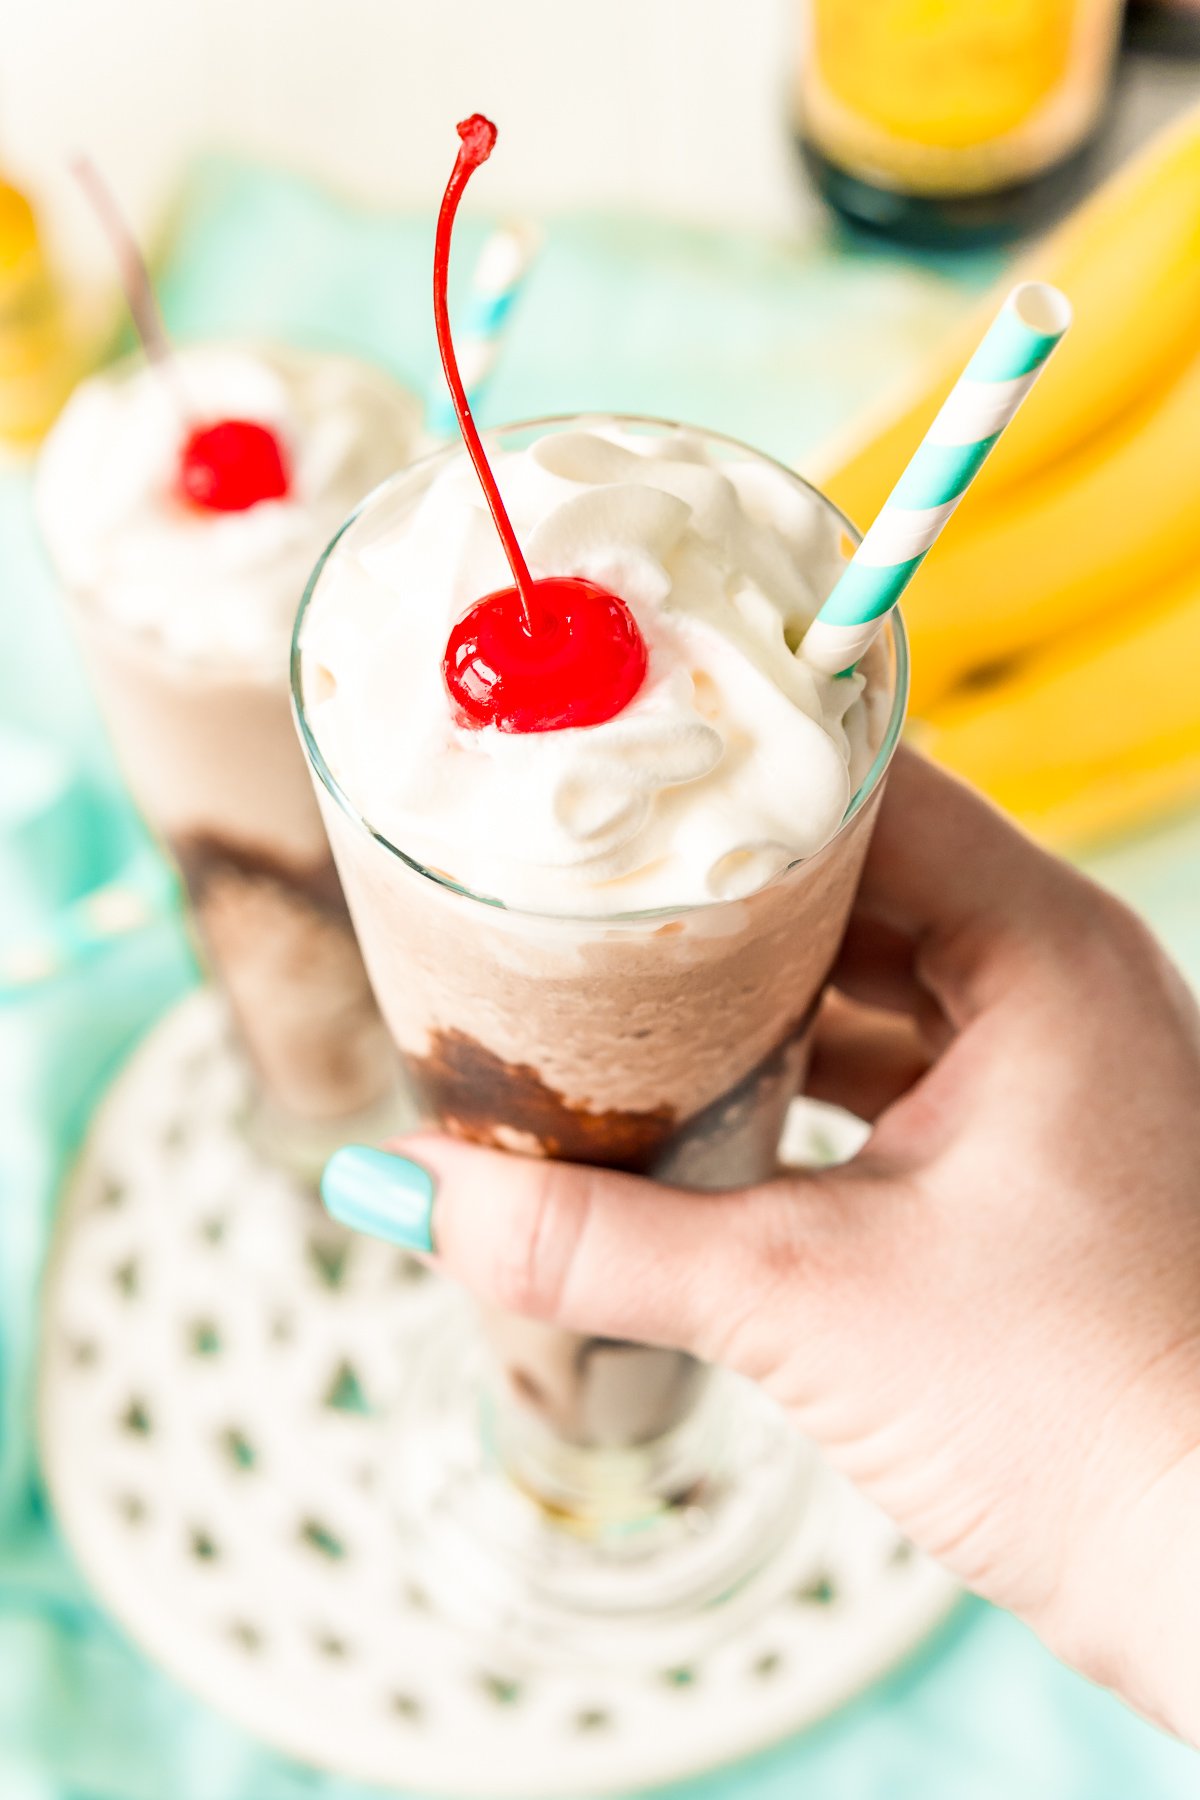 Woman's hand holding a frozen cocktail with whipped cream and a cherry on top.